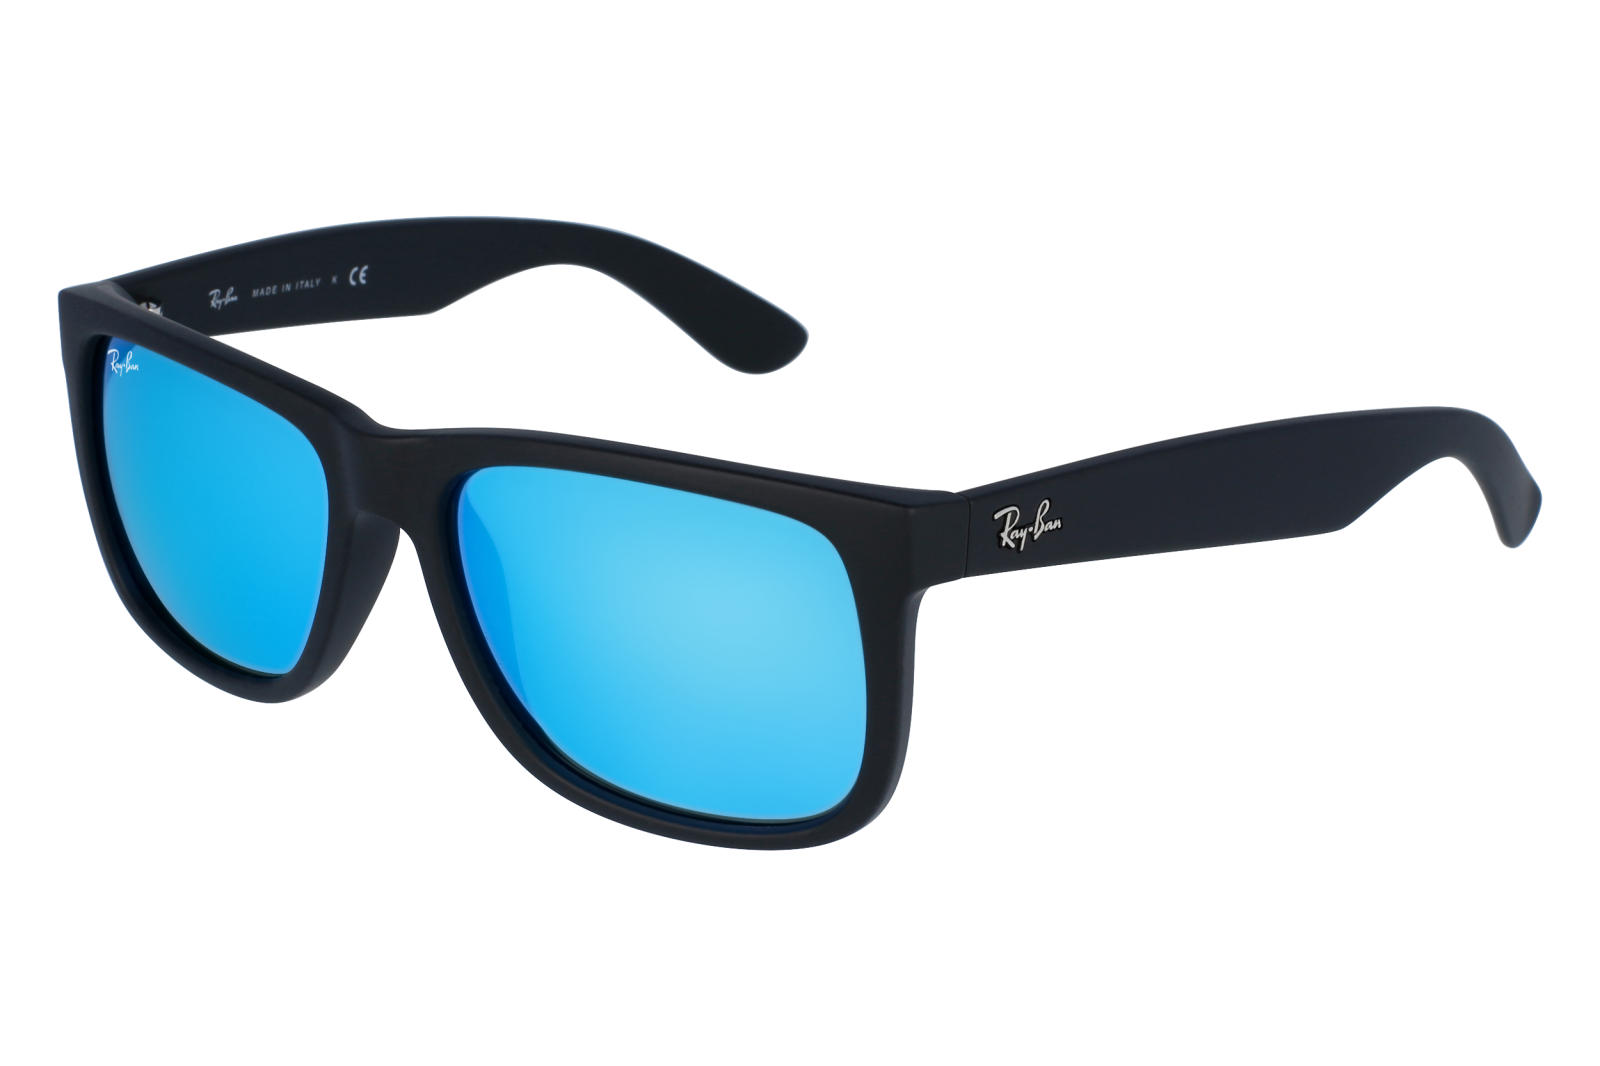 Soleil Ray-Ban Justin Rb4165 622/55 